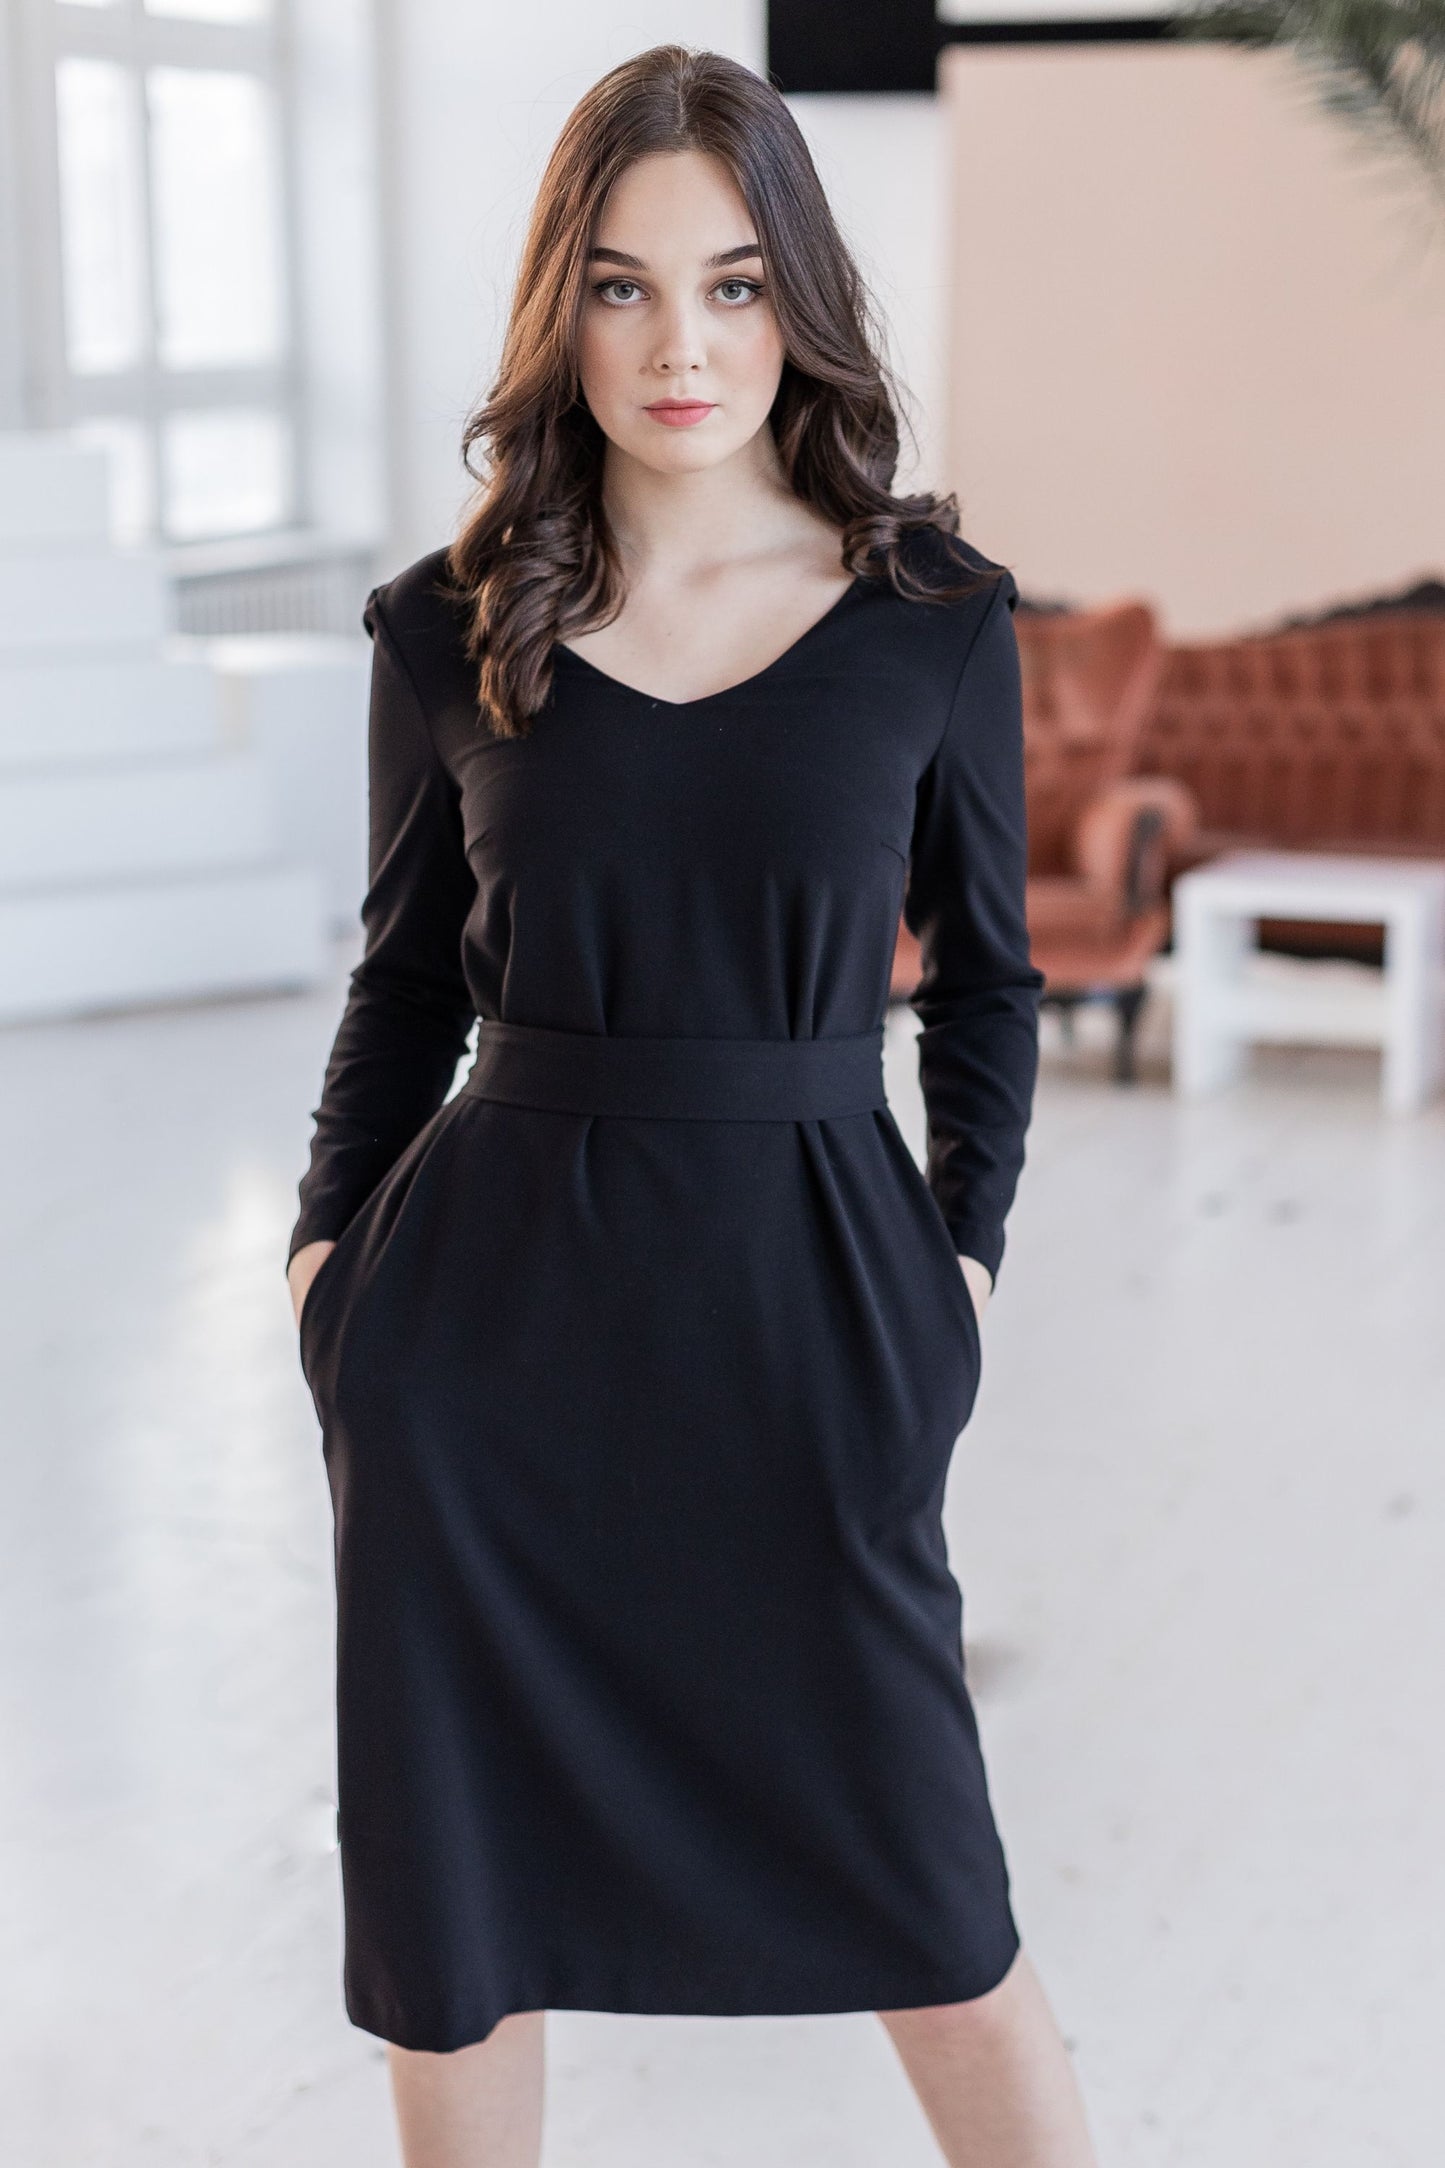 Black classic, loose-fitting dress with a belt